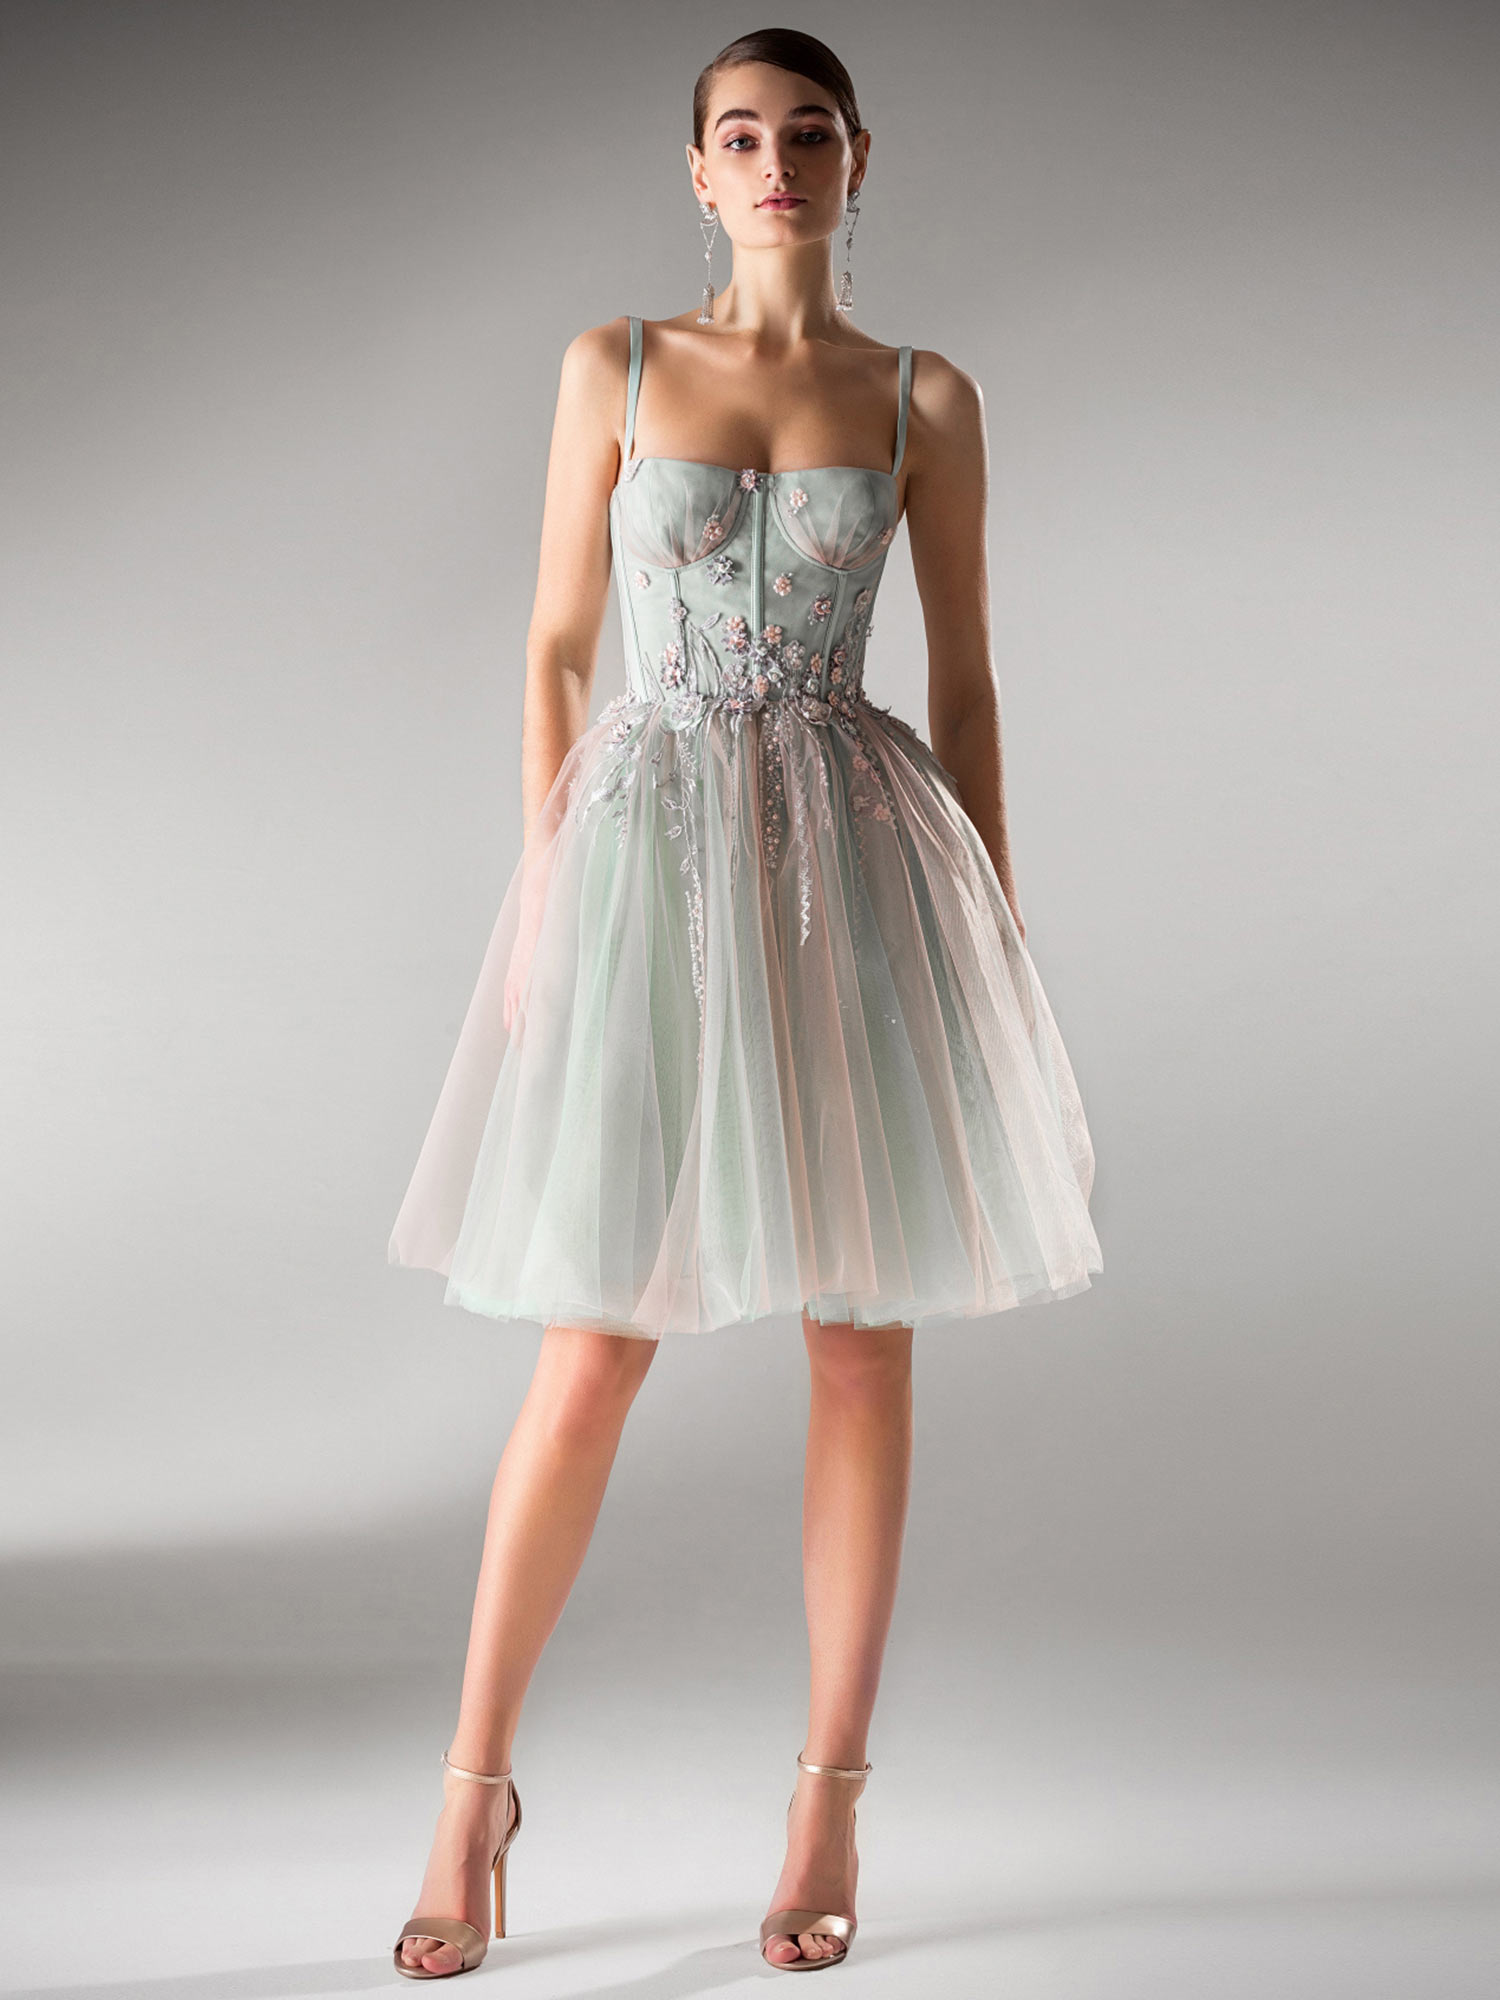 Style #440a, available in pink, gray, light green